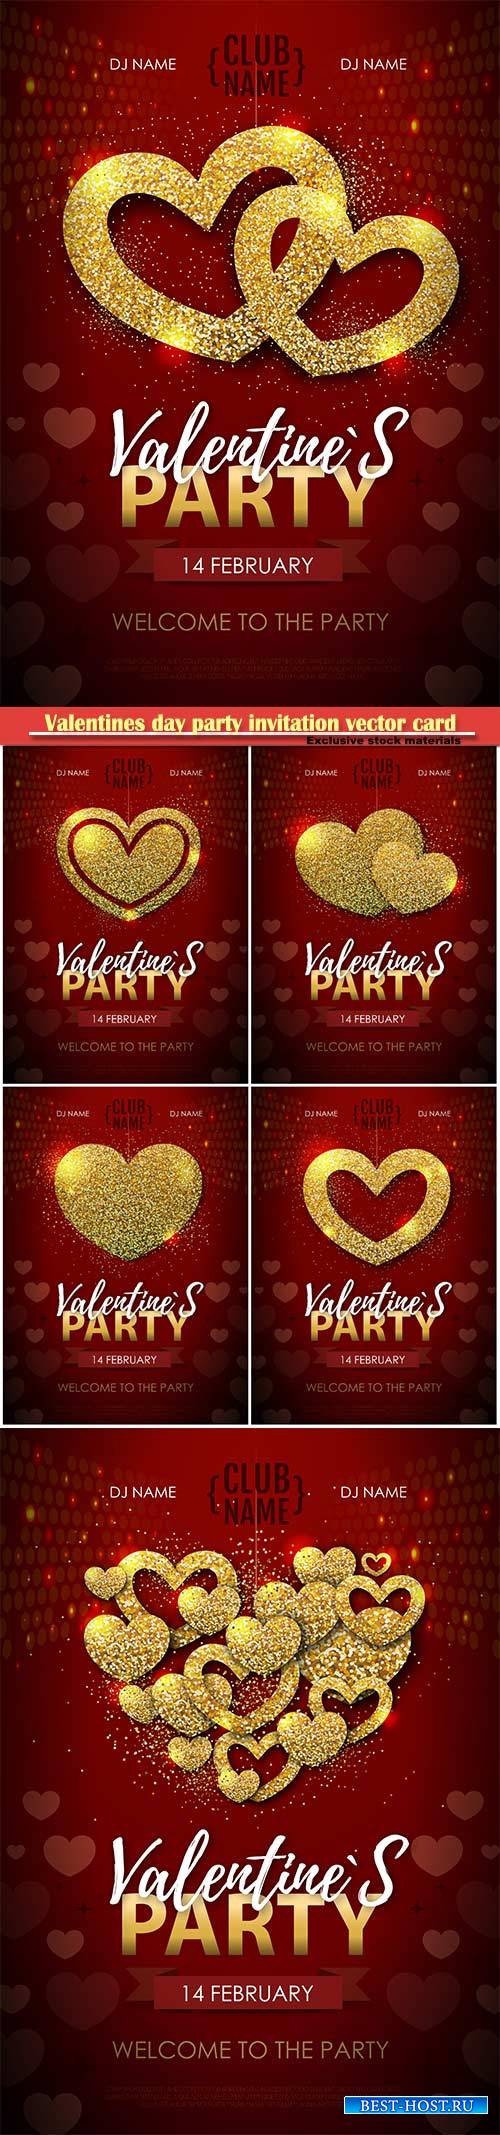 Valentines day party invitation vector card # 13